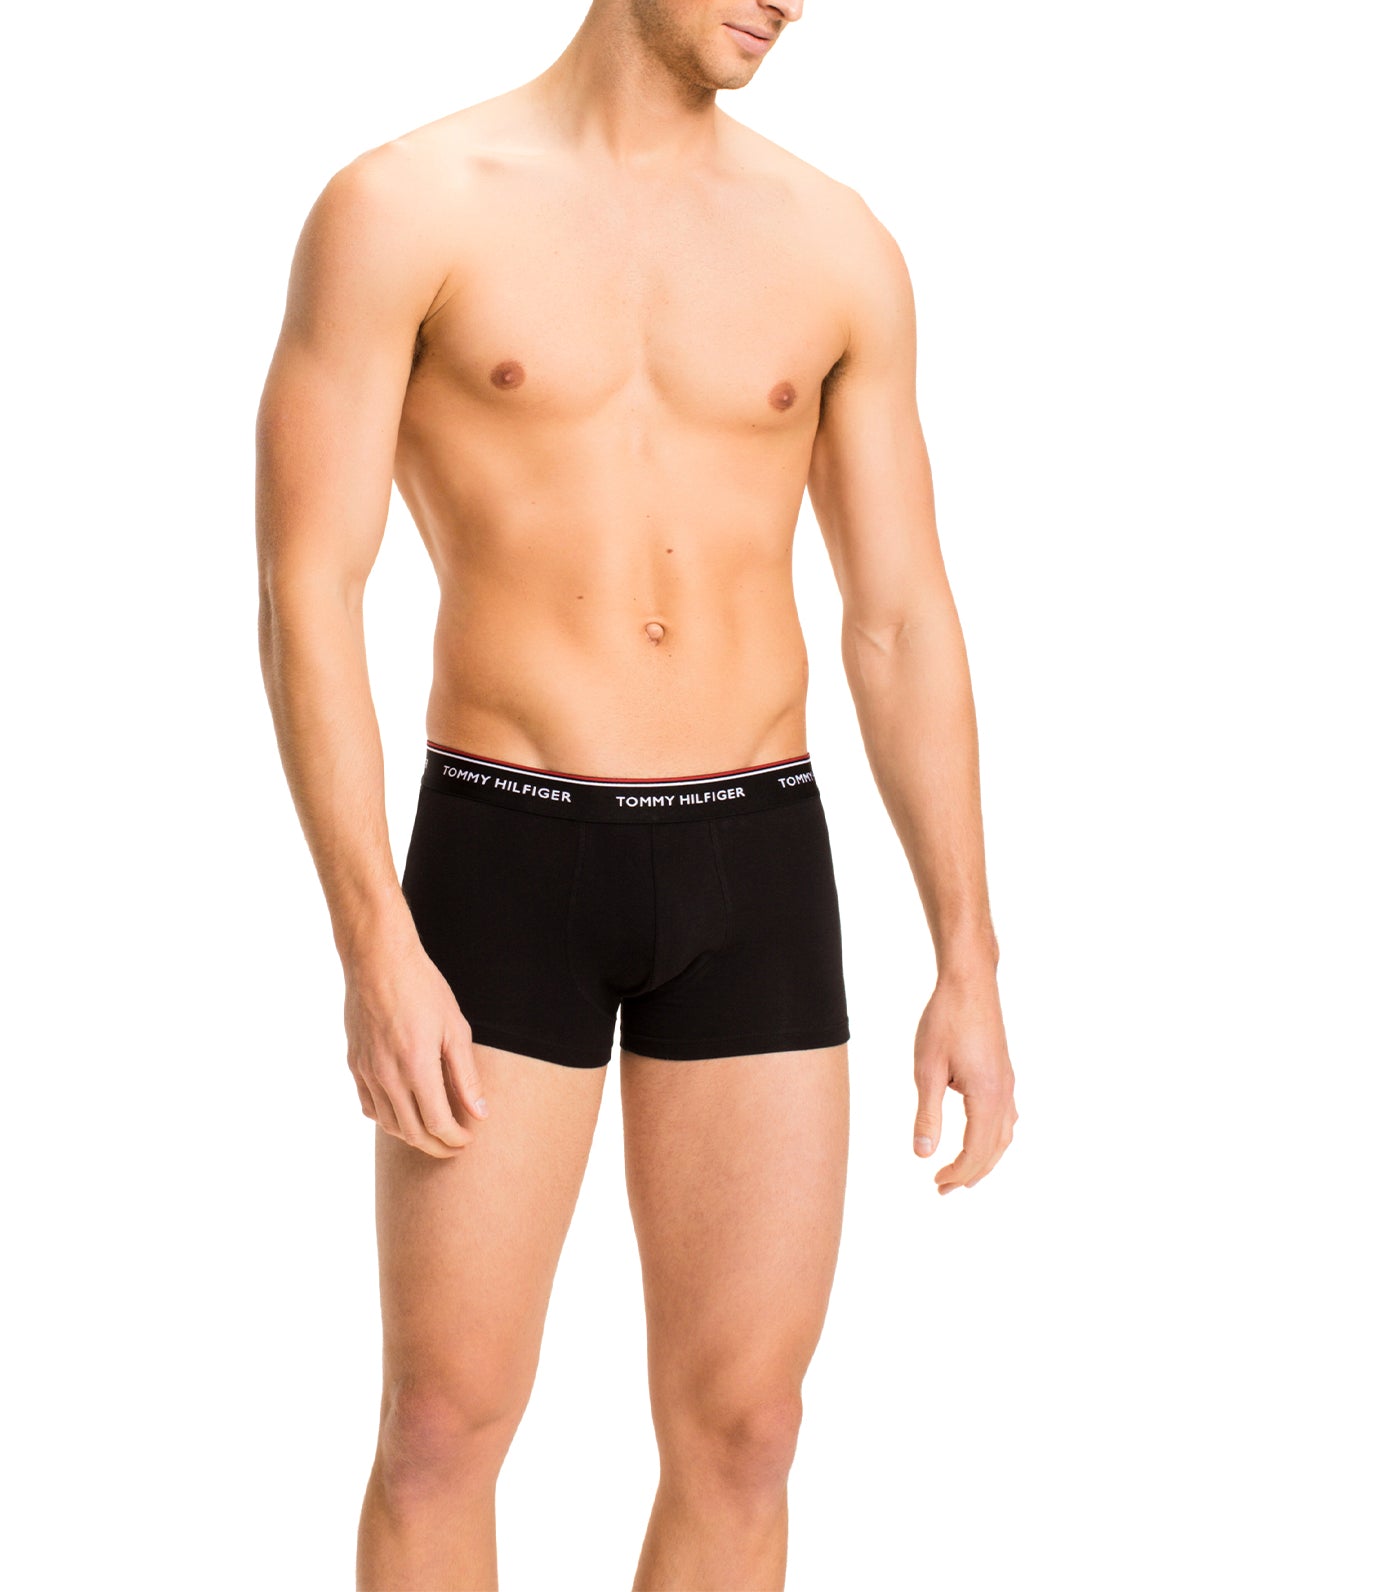 Low Rise Trunks 3 Pack Black/Gray Heather/White